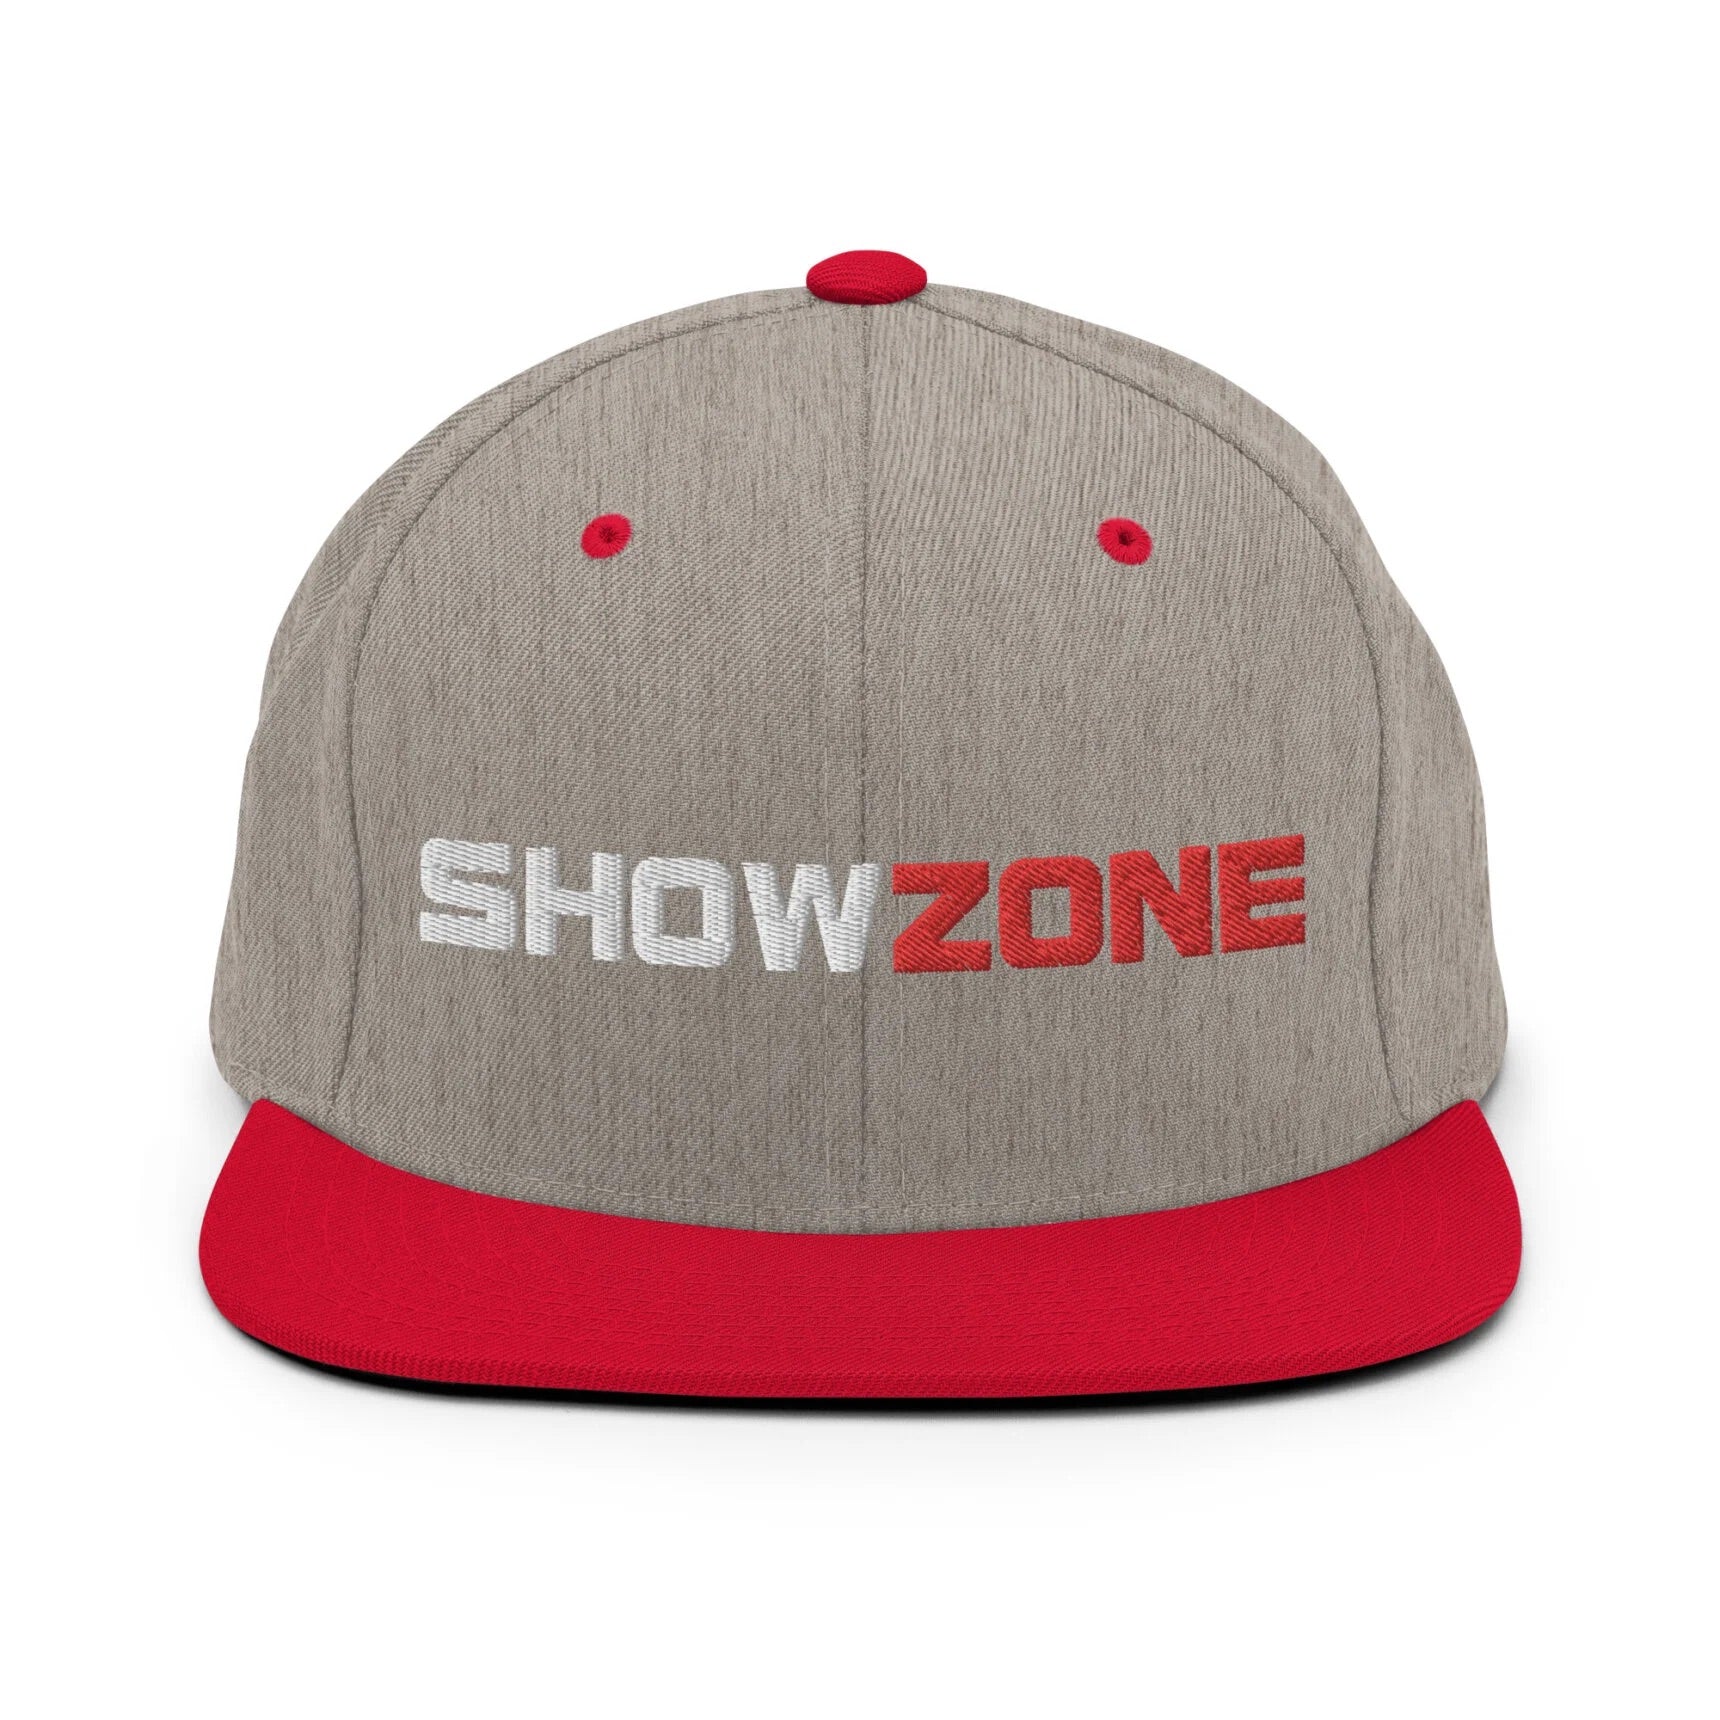 ShowZone snapback hat in heather grey with text logo and red brim accents